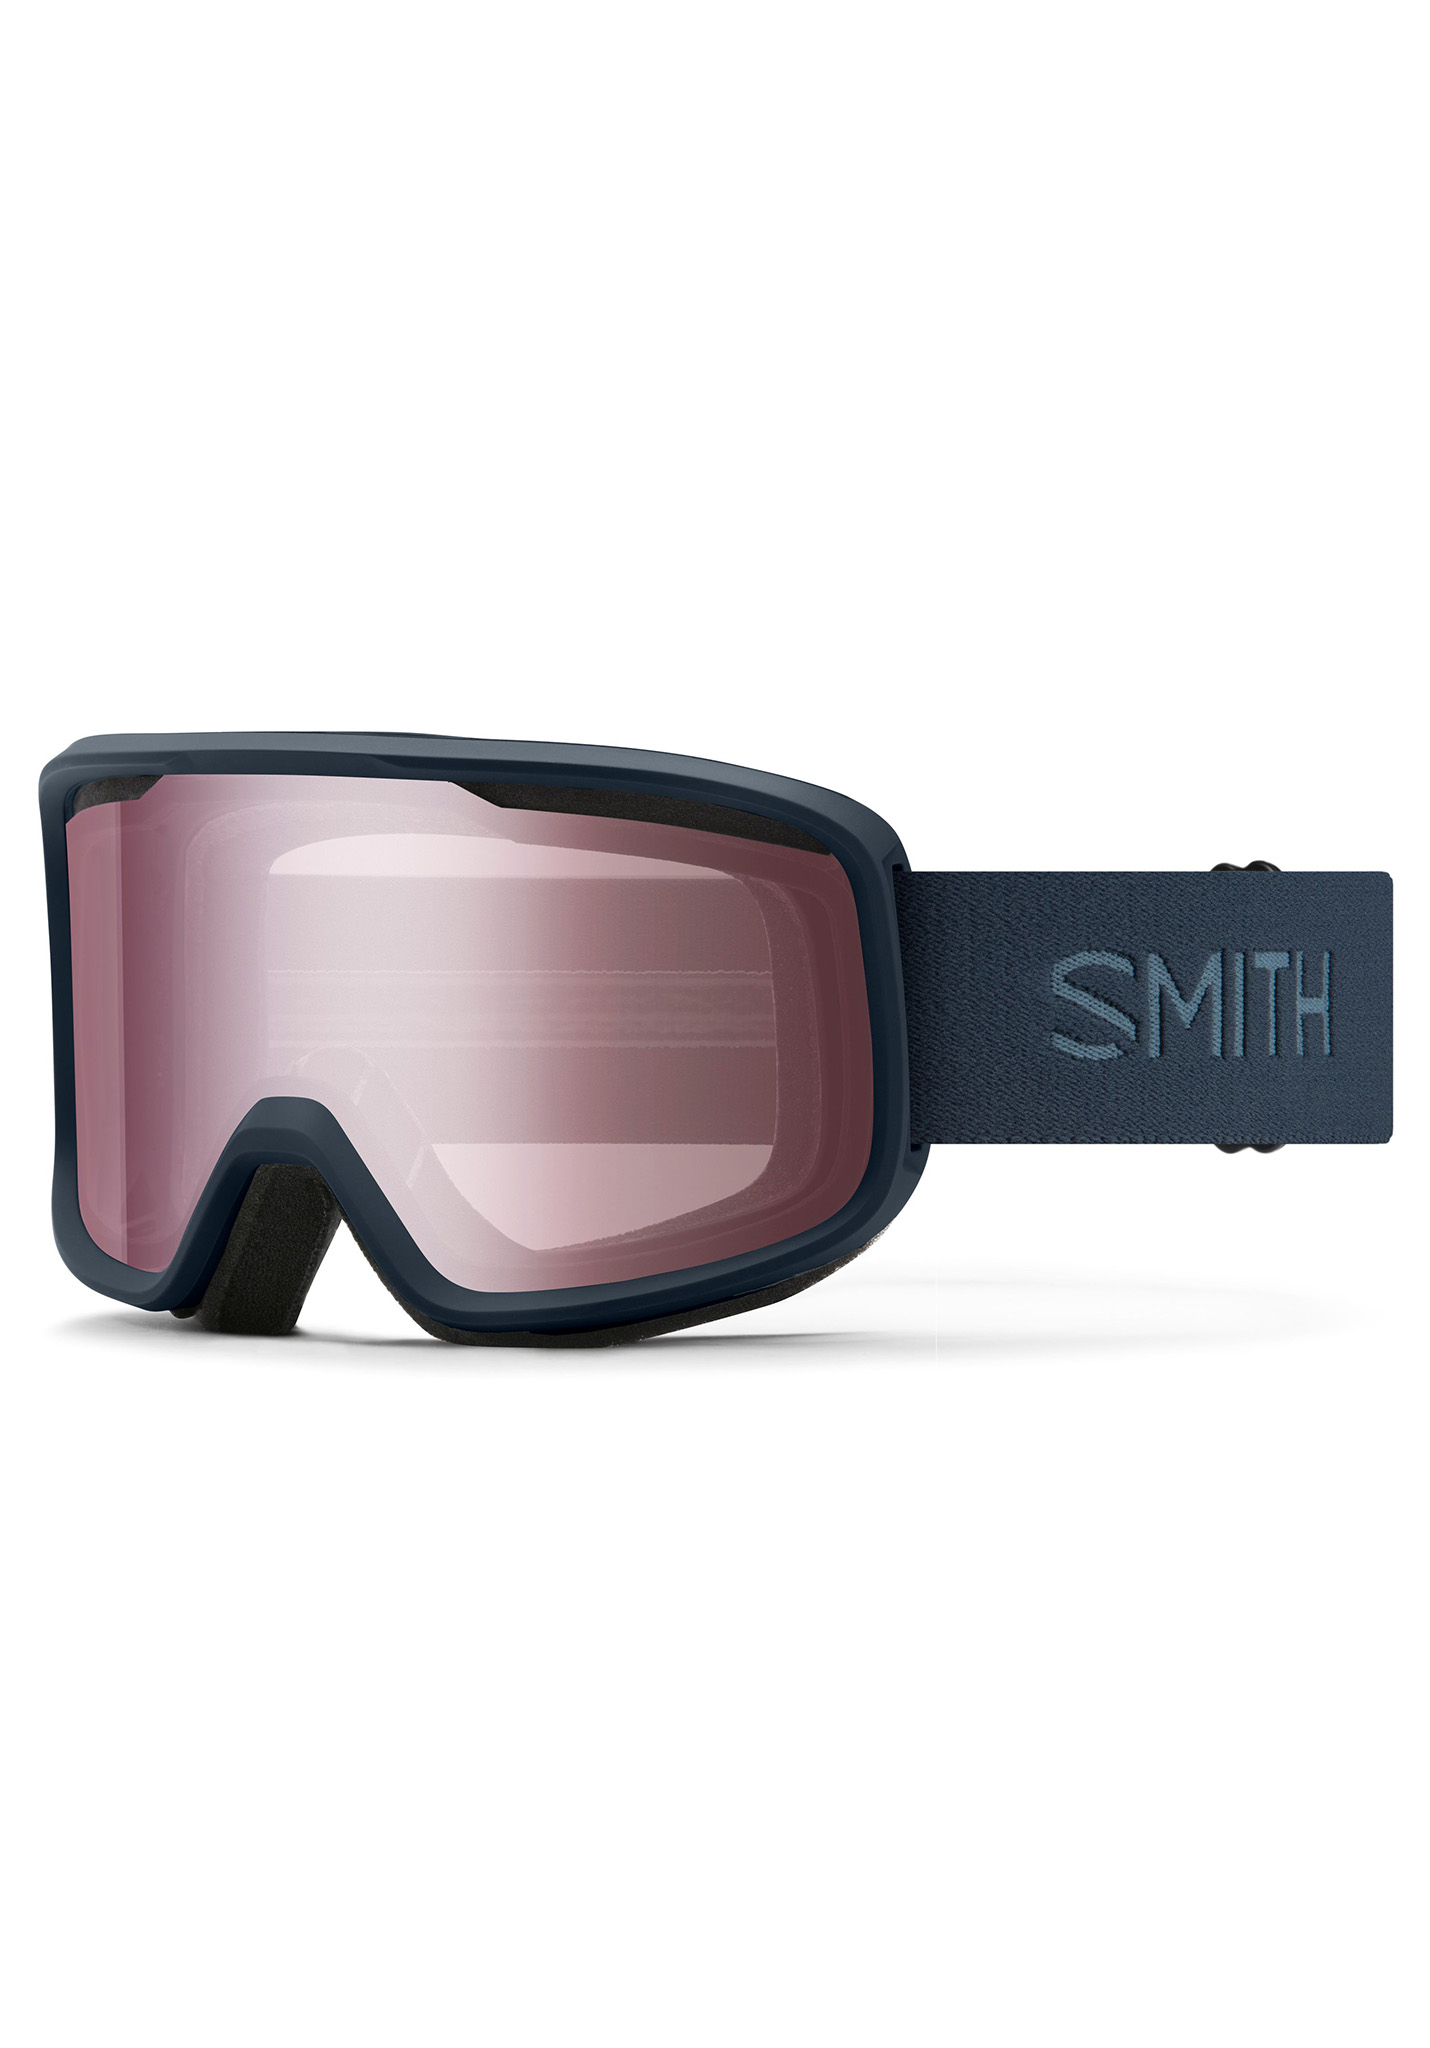 Smith Frontier Snowboardbrillen rotes chrom One Size